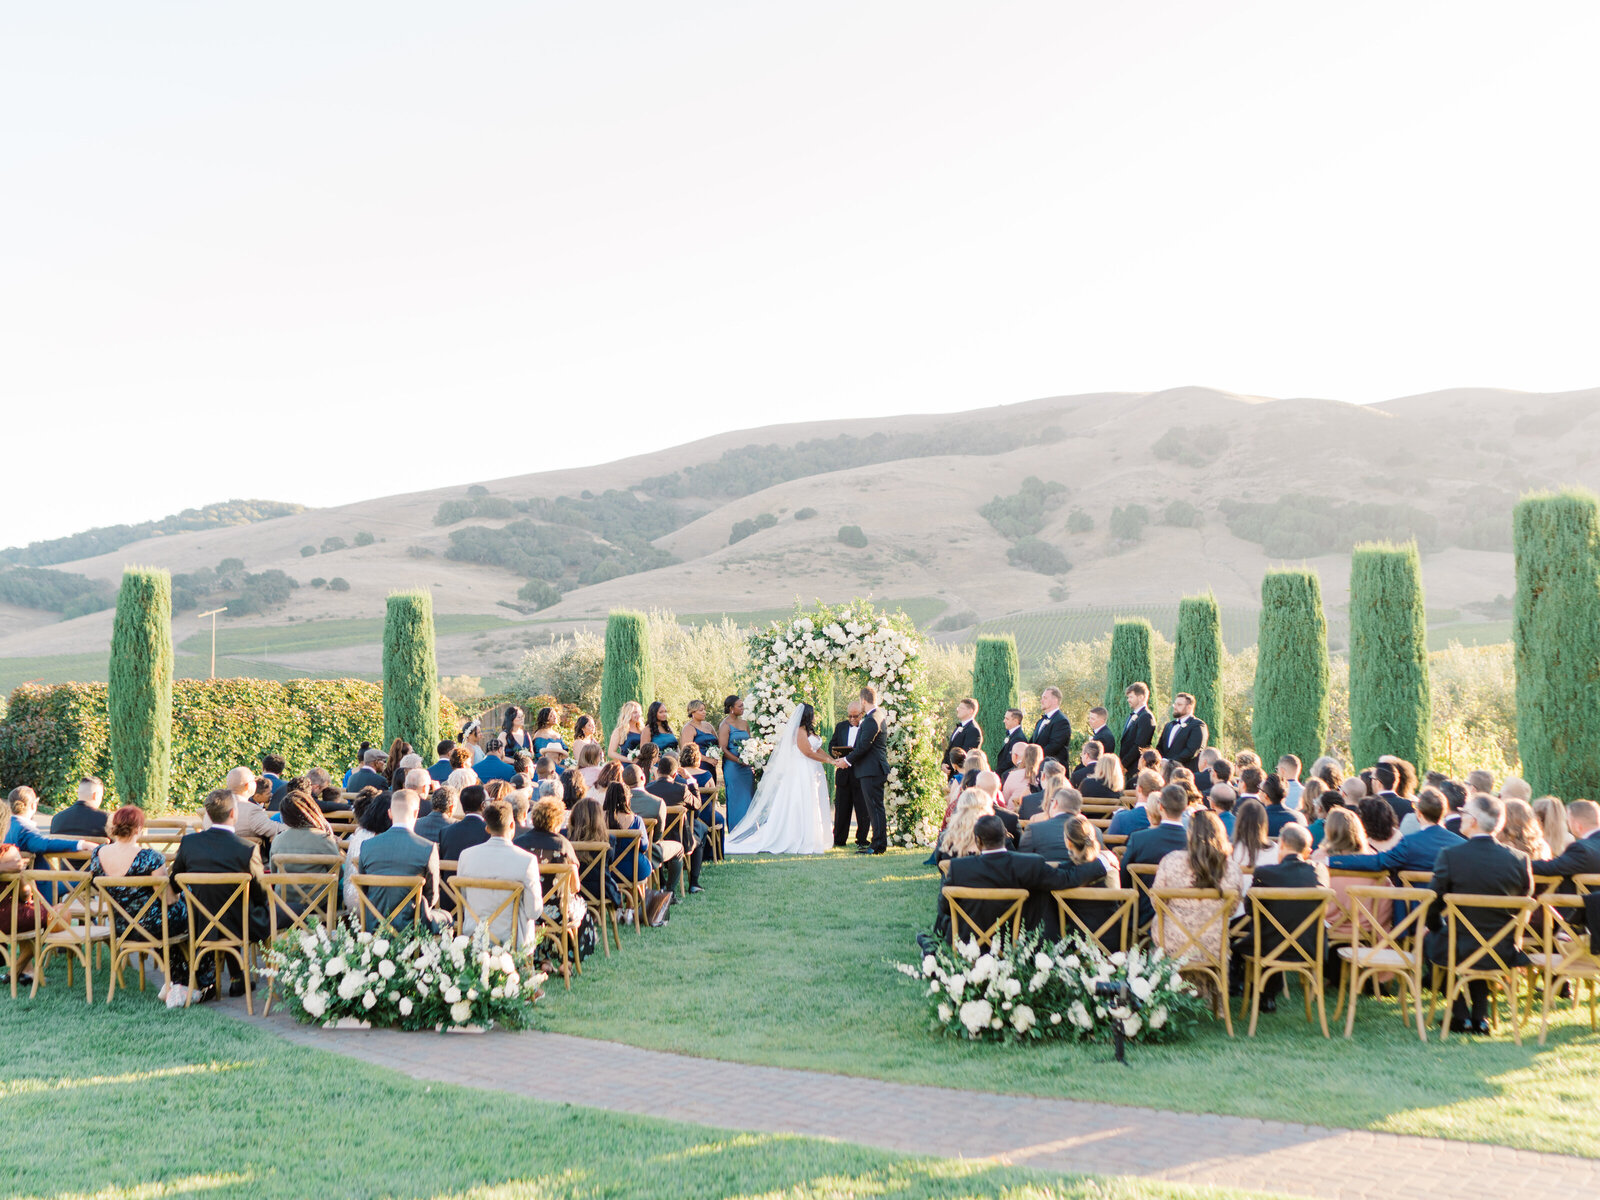 outdoor wedding reception in a garden with a beautiful view